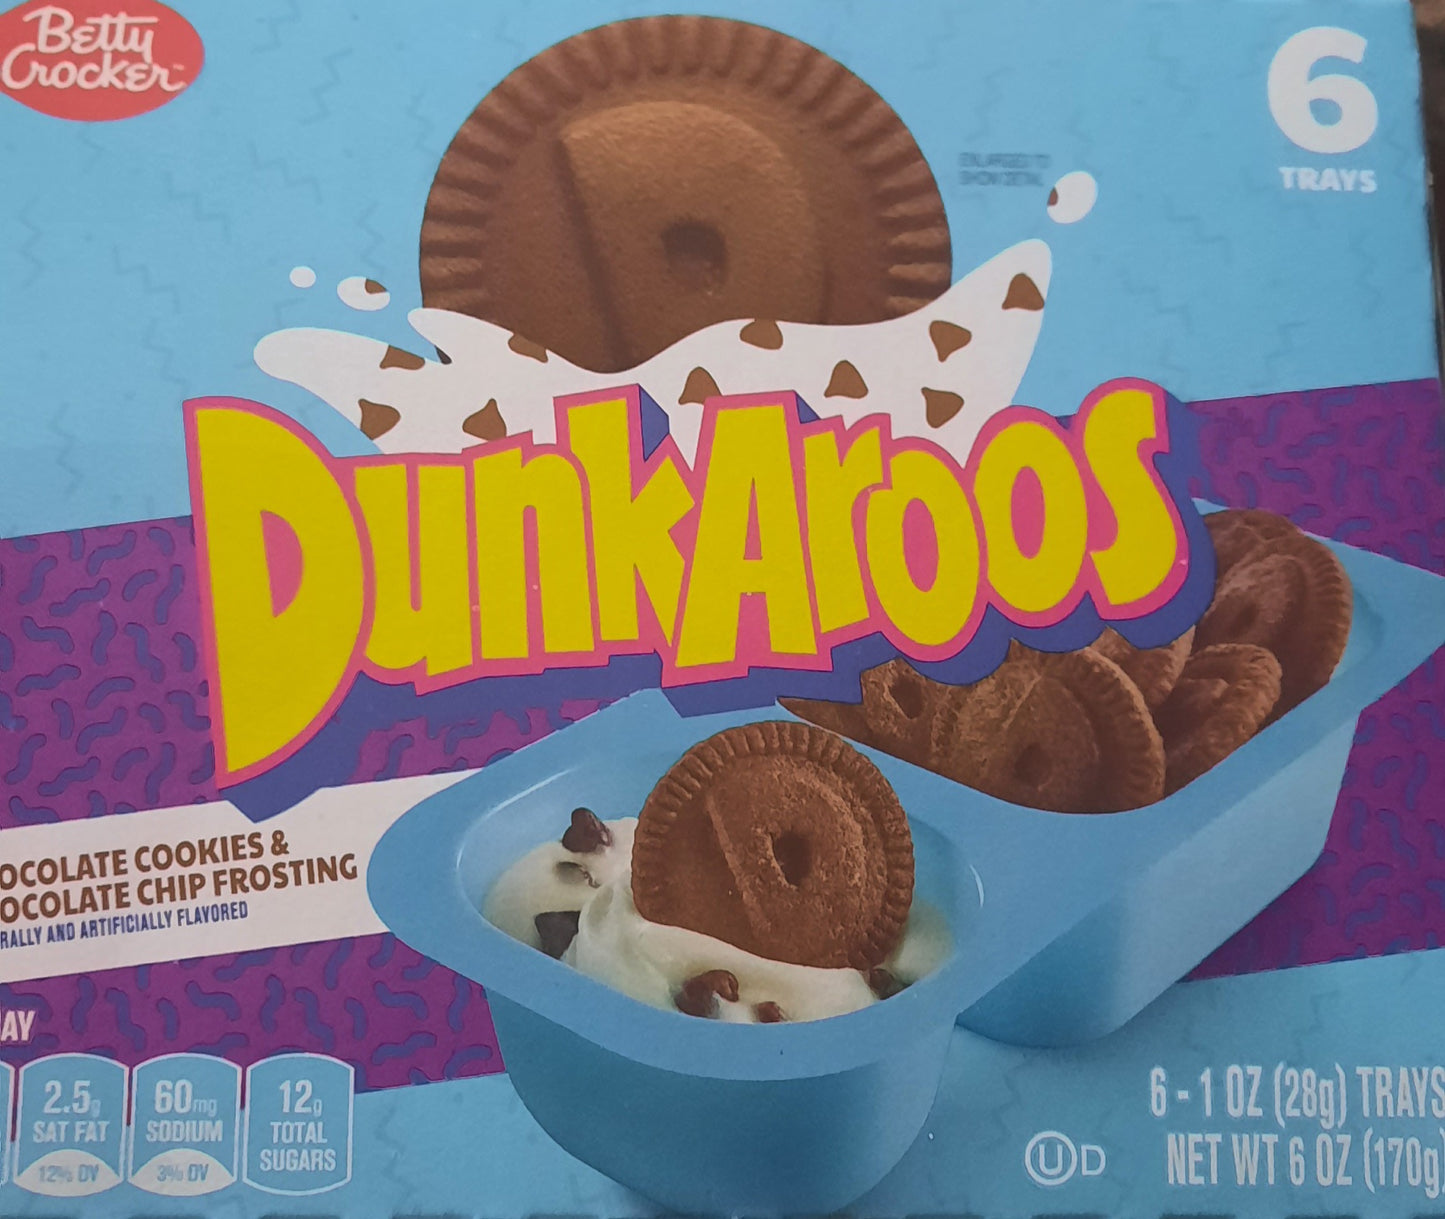 Dunk-A-Roos cookies and cream